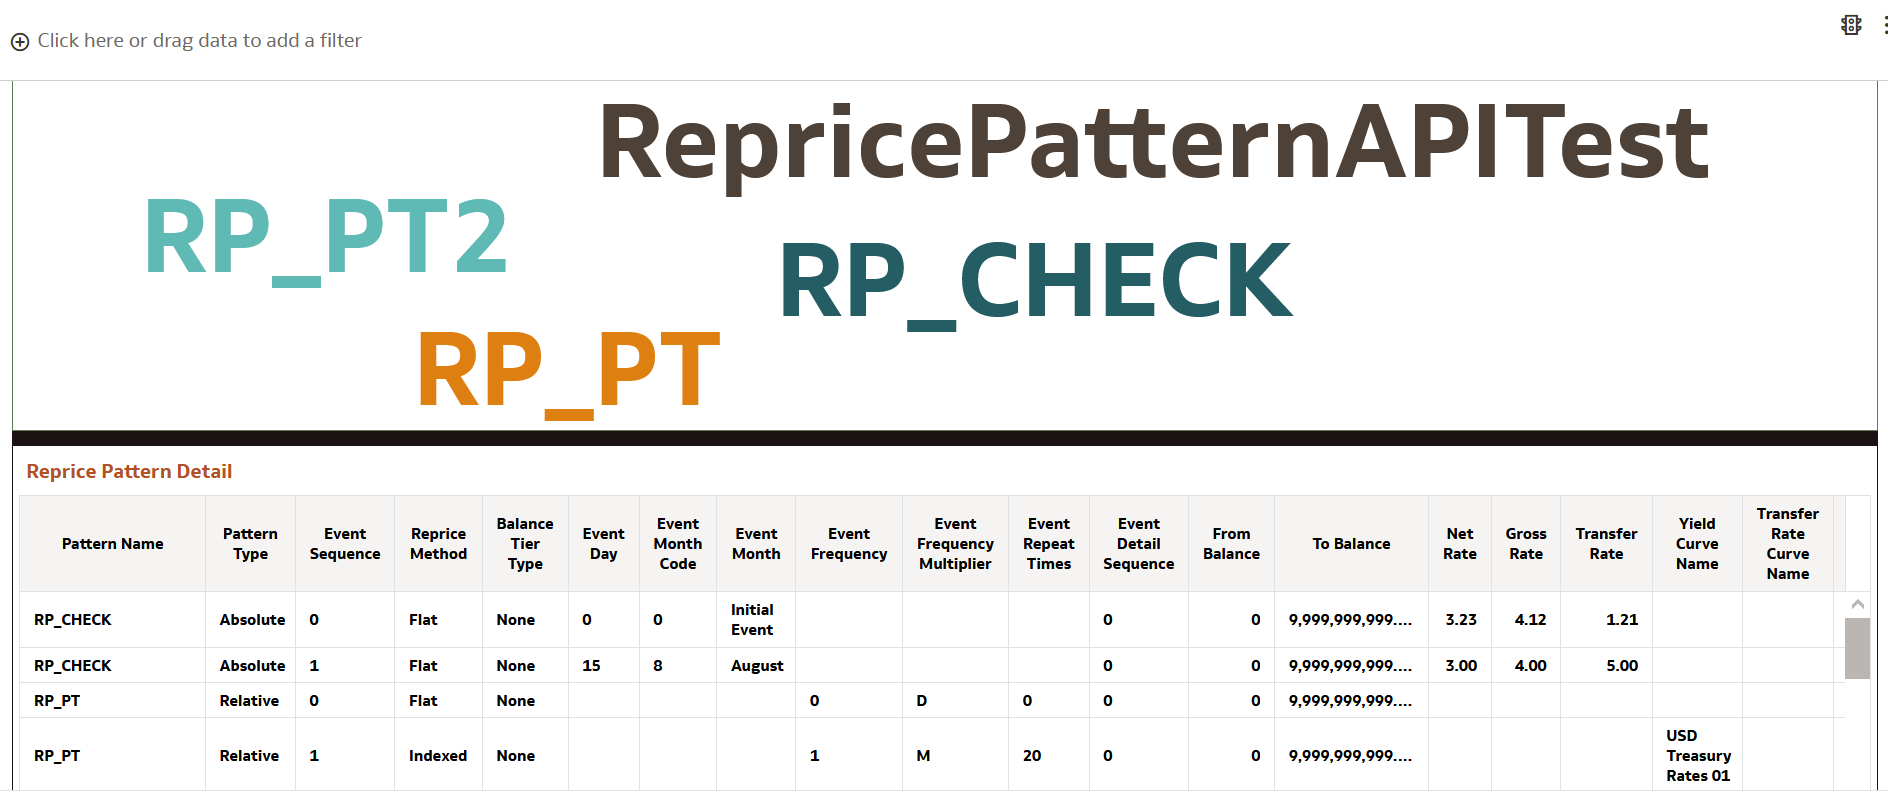 Repricing Pattern Report